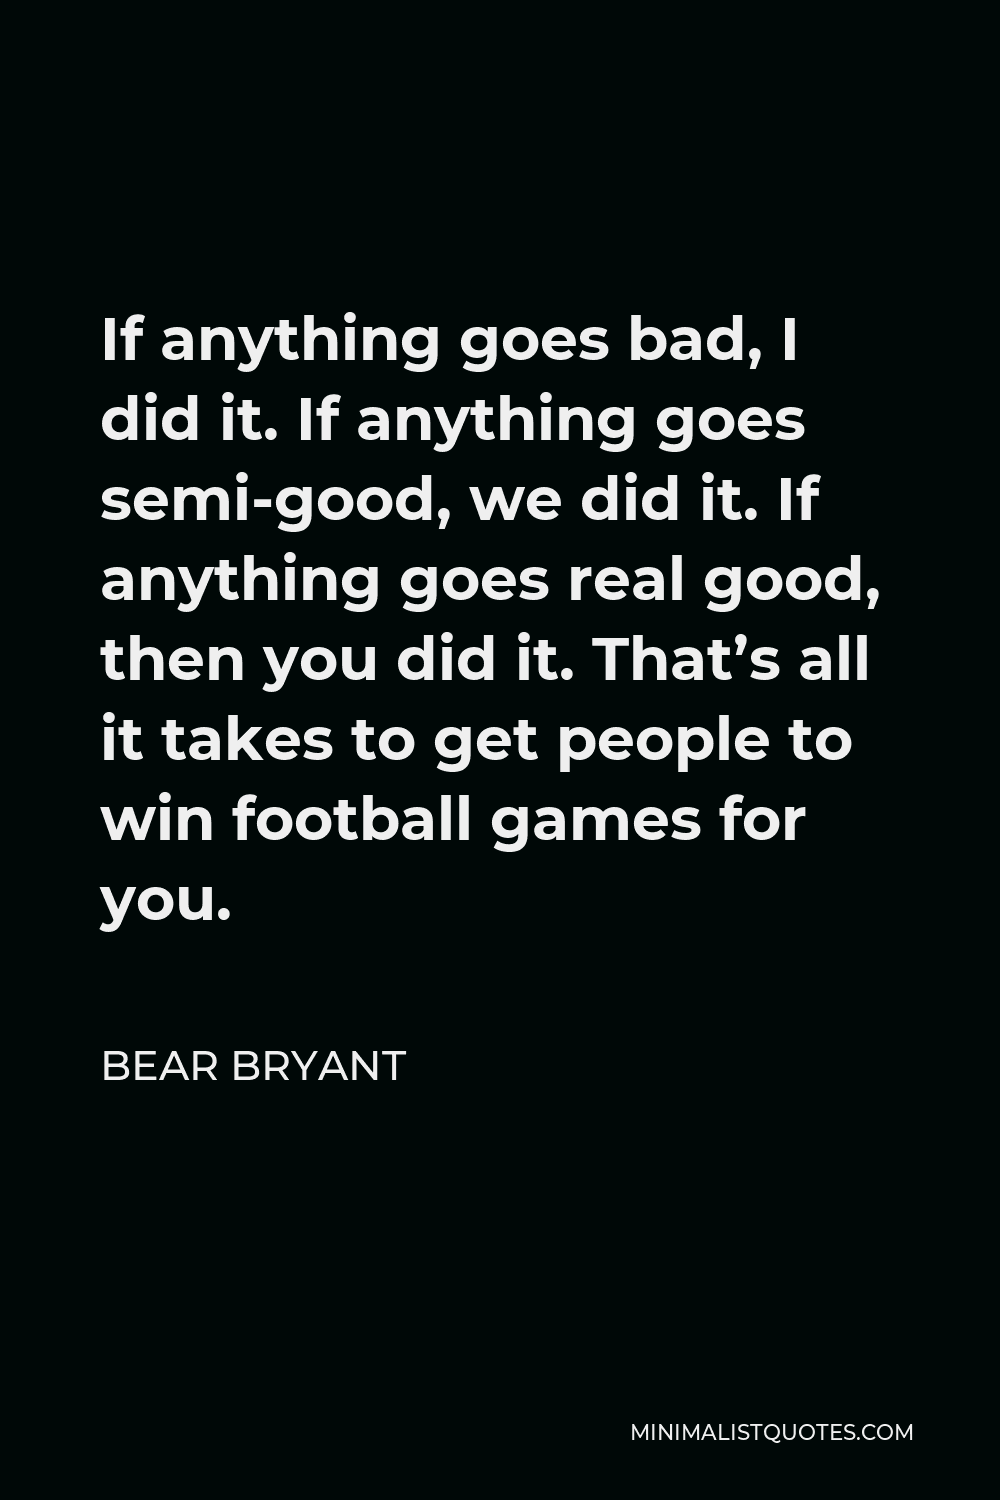 Bear Bryant Quote - If anything goes bad, I did it. If anything goes semi-good, we did it. If anything goes real good, then you did it. That’s all it takes to get people to win football games for you.